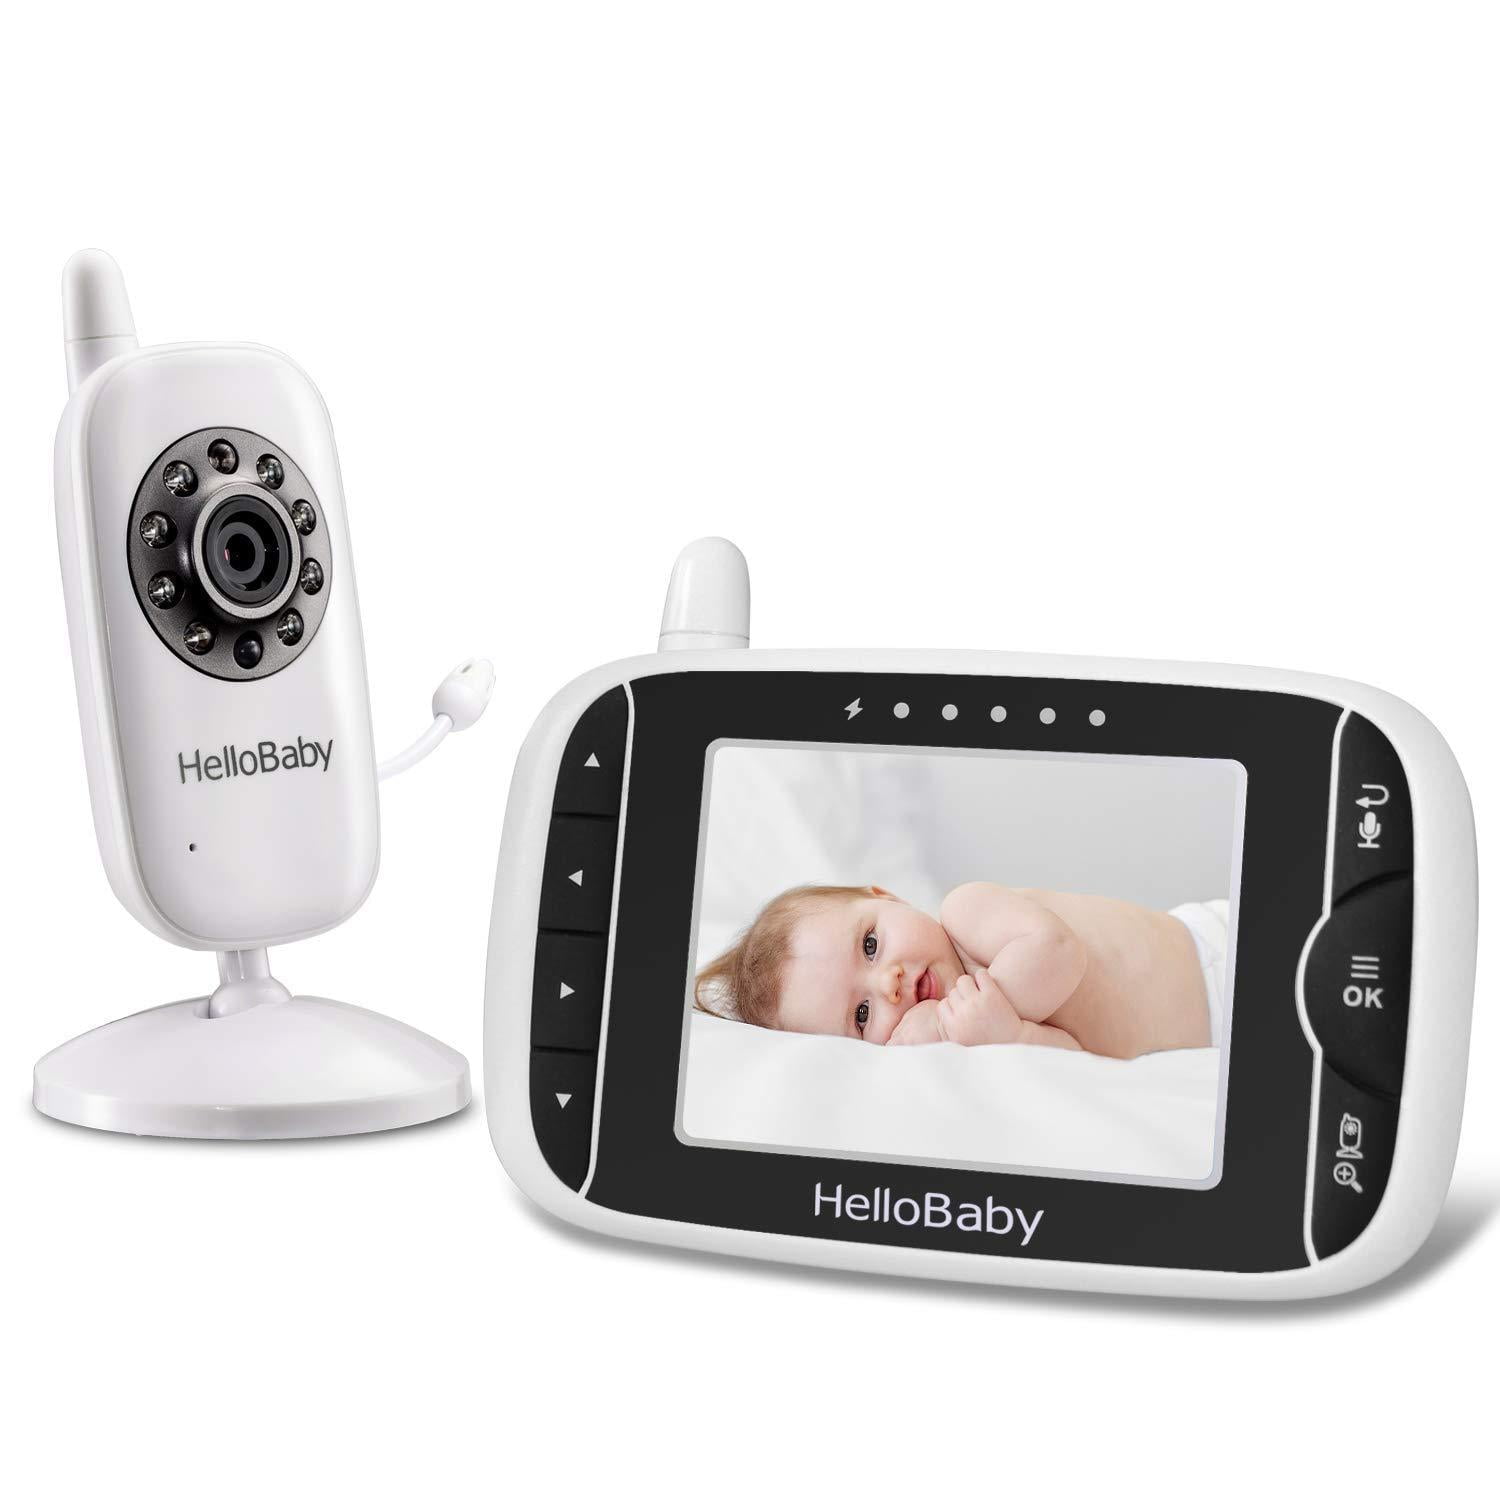 VISIONNOVA 8 WI-FI CONNECT BABY VIDEO MONITOR WAREHOUSE CLEARANCE 